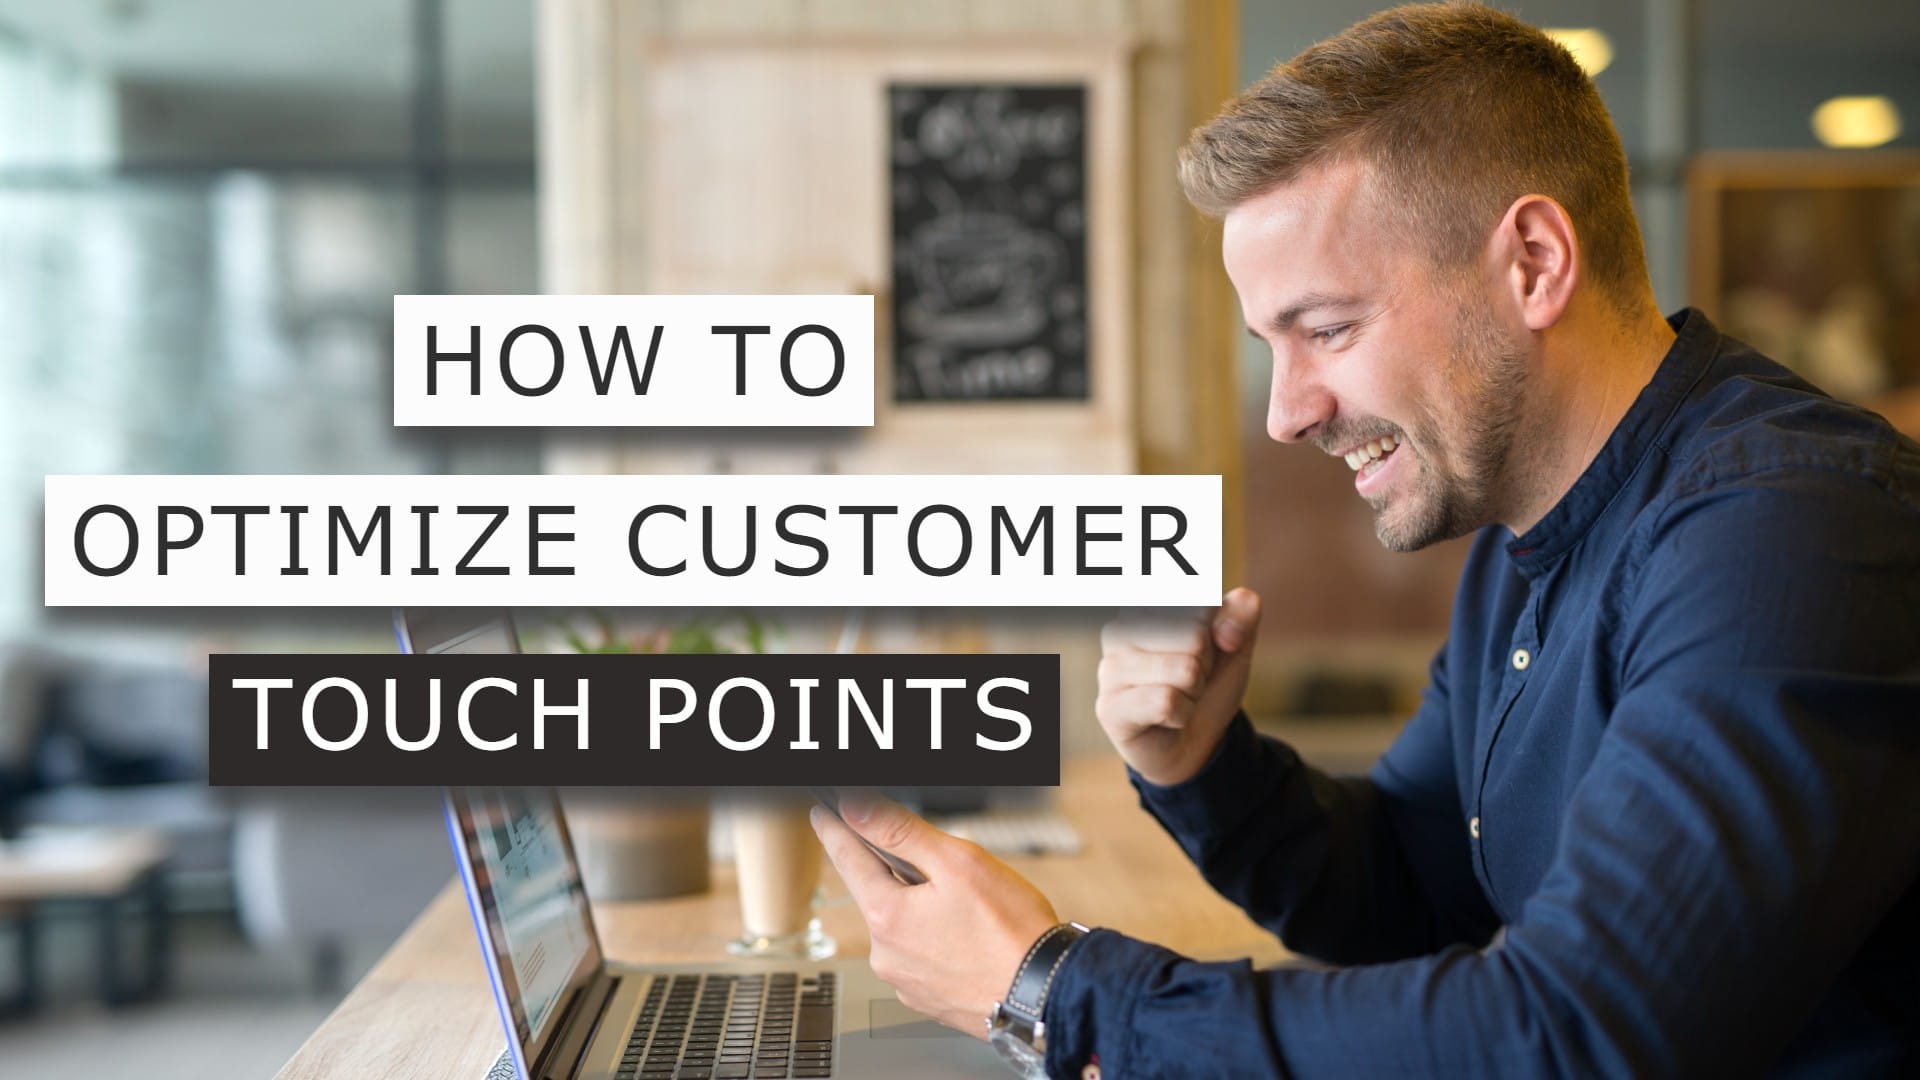 How to Identify and Optimize Customer Touch Points?